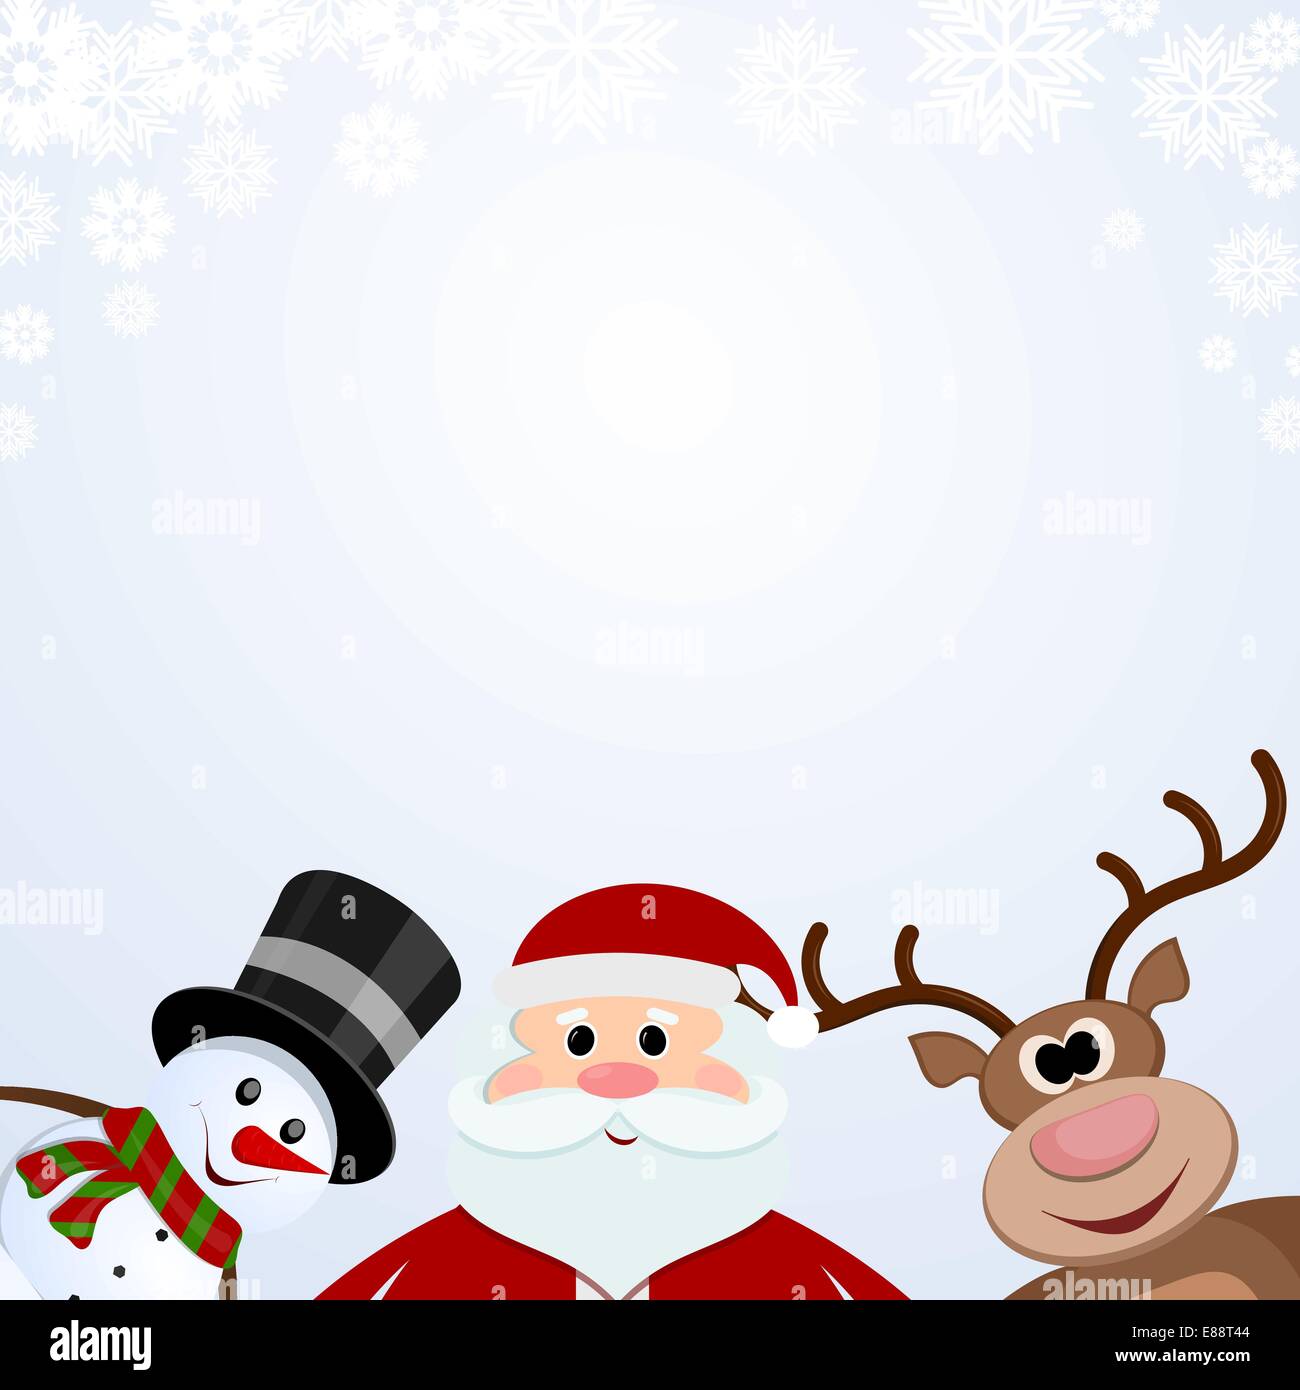 Santa Claus, snowman and reindeer on a snowy background Stock Vector